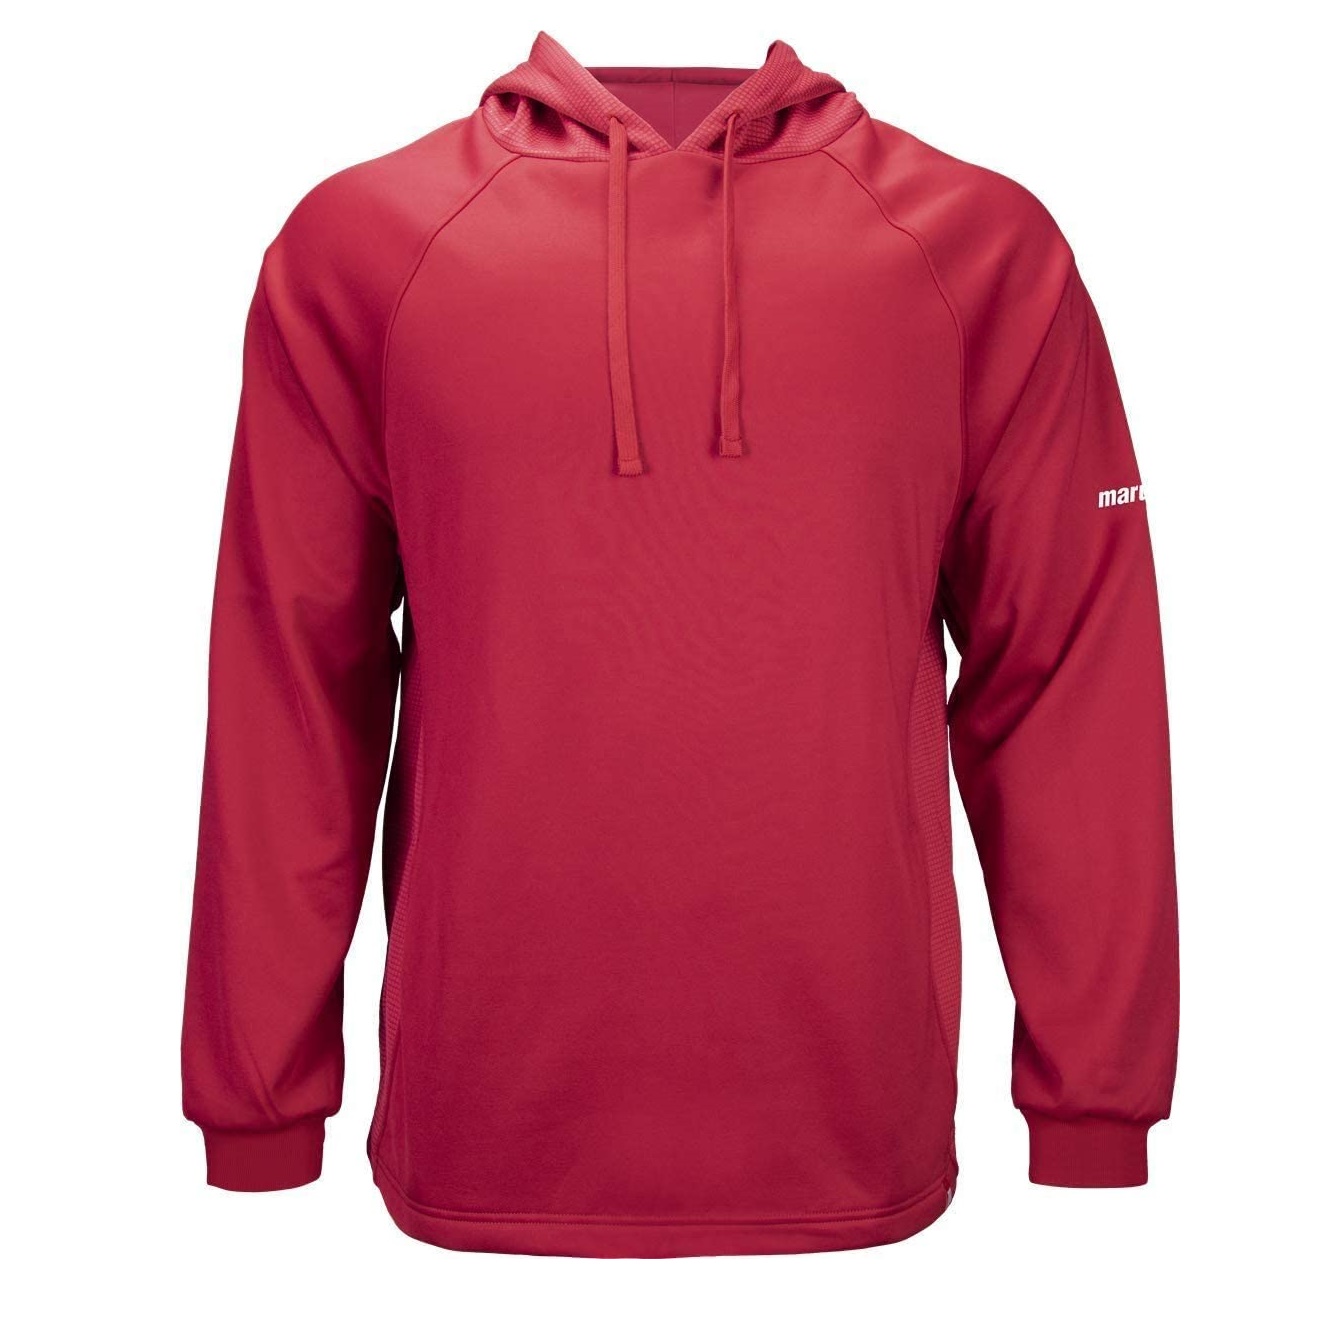 Marucci Sports - Warm-Up Tech Fleece (MATFLHTCY) Baseball Hoodie. As a company founded, majority-owned, and operated by current and former Big Leaguers, Marucci is dedicated to quality and committed to providing players at every level with the tools they want and need to be successful. Based in Baton Rouge, Louisiana, Marucci was founded by two former Big Leaguers and their athletic trainer who began handcrafting bats for some of the best players in the game from their garage. Fast forward 10 years, and that dedication to quality and understanding of players needs has turned into an All-American success story. Today, Marucci is the new Number One bat in the Big Leagues. WARM UP TECHNICAL FLEECE HOODIE  Soft, smooth exterior finish for maximum comfort Texture inserts on hood and side seams provide a fresh look Neck closure with matching openings and drawstring Three-piece hood construction provides a better fit during rainy or windy weather On-seam pockets for added storage 100% Polyester 